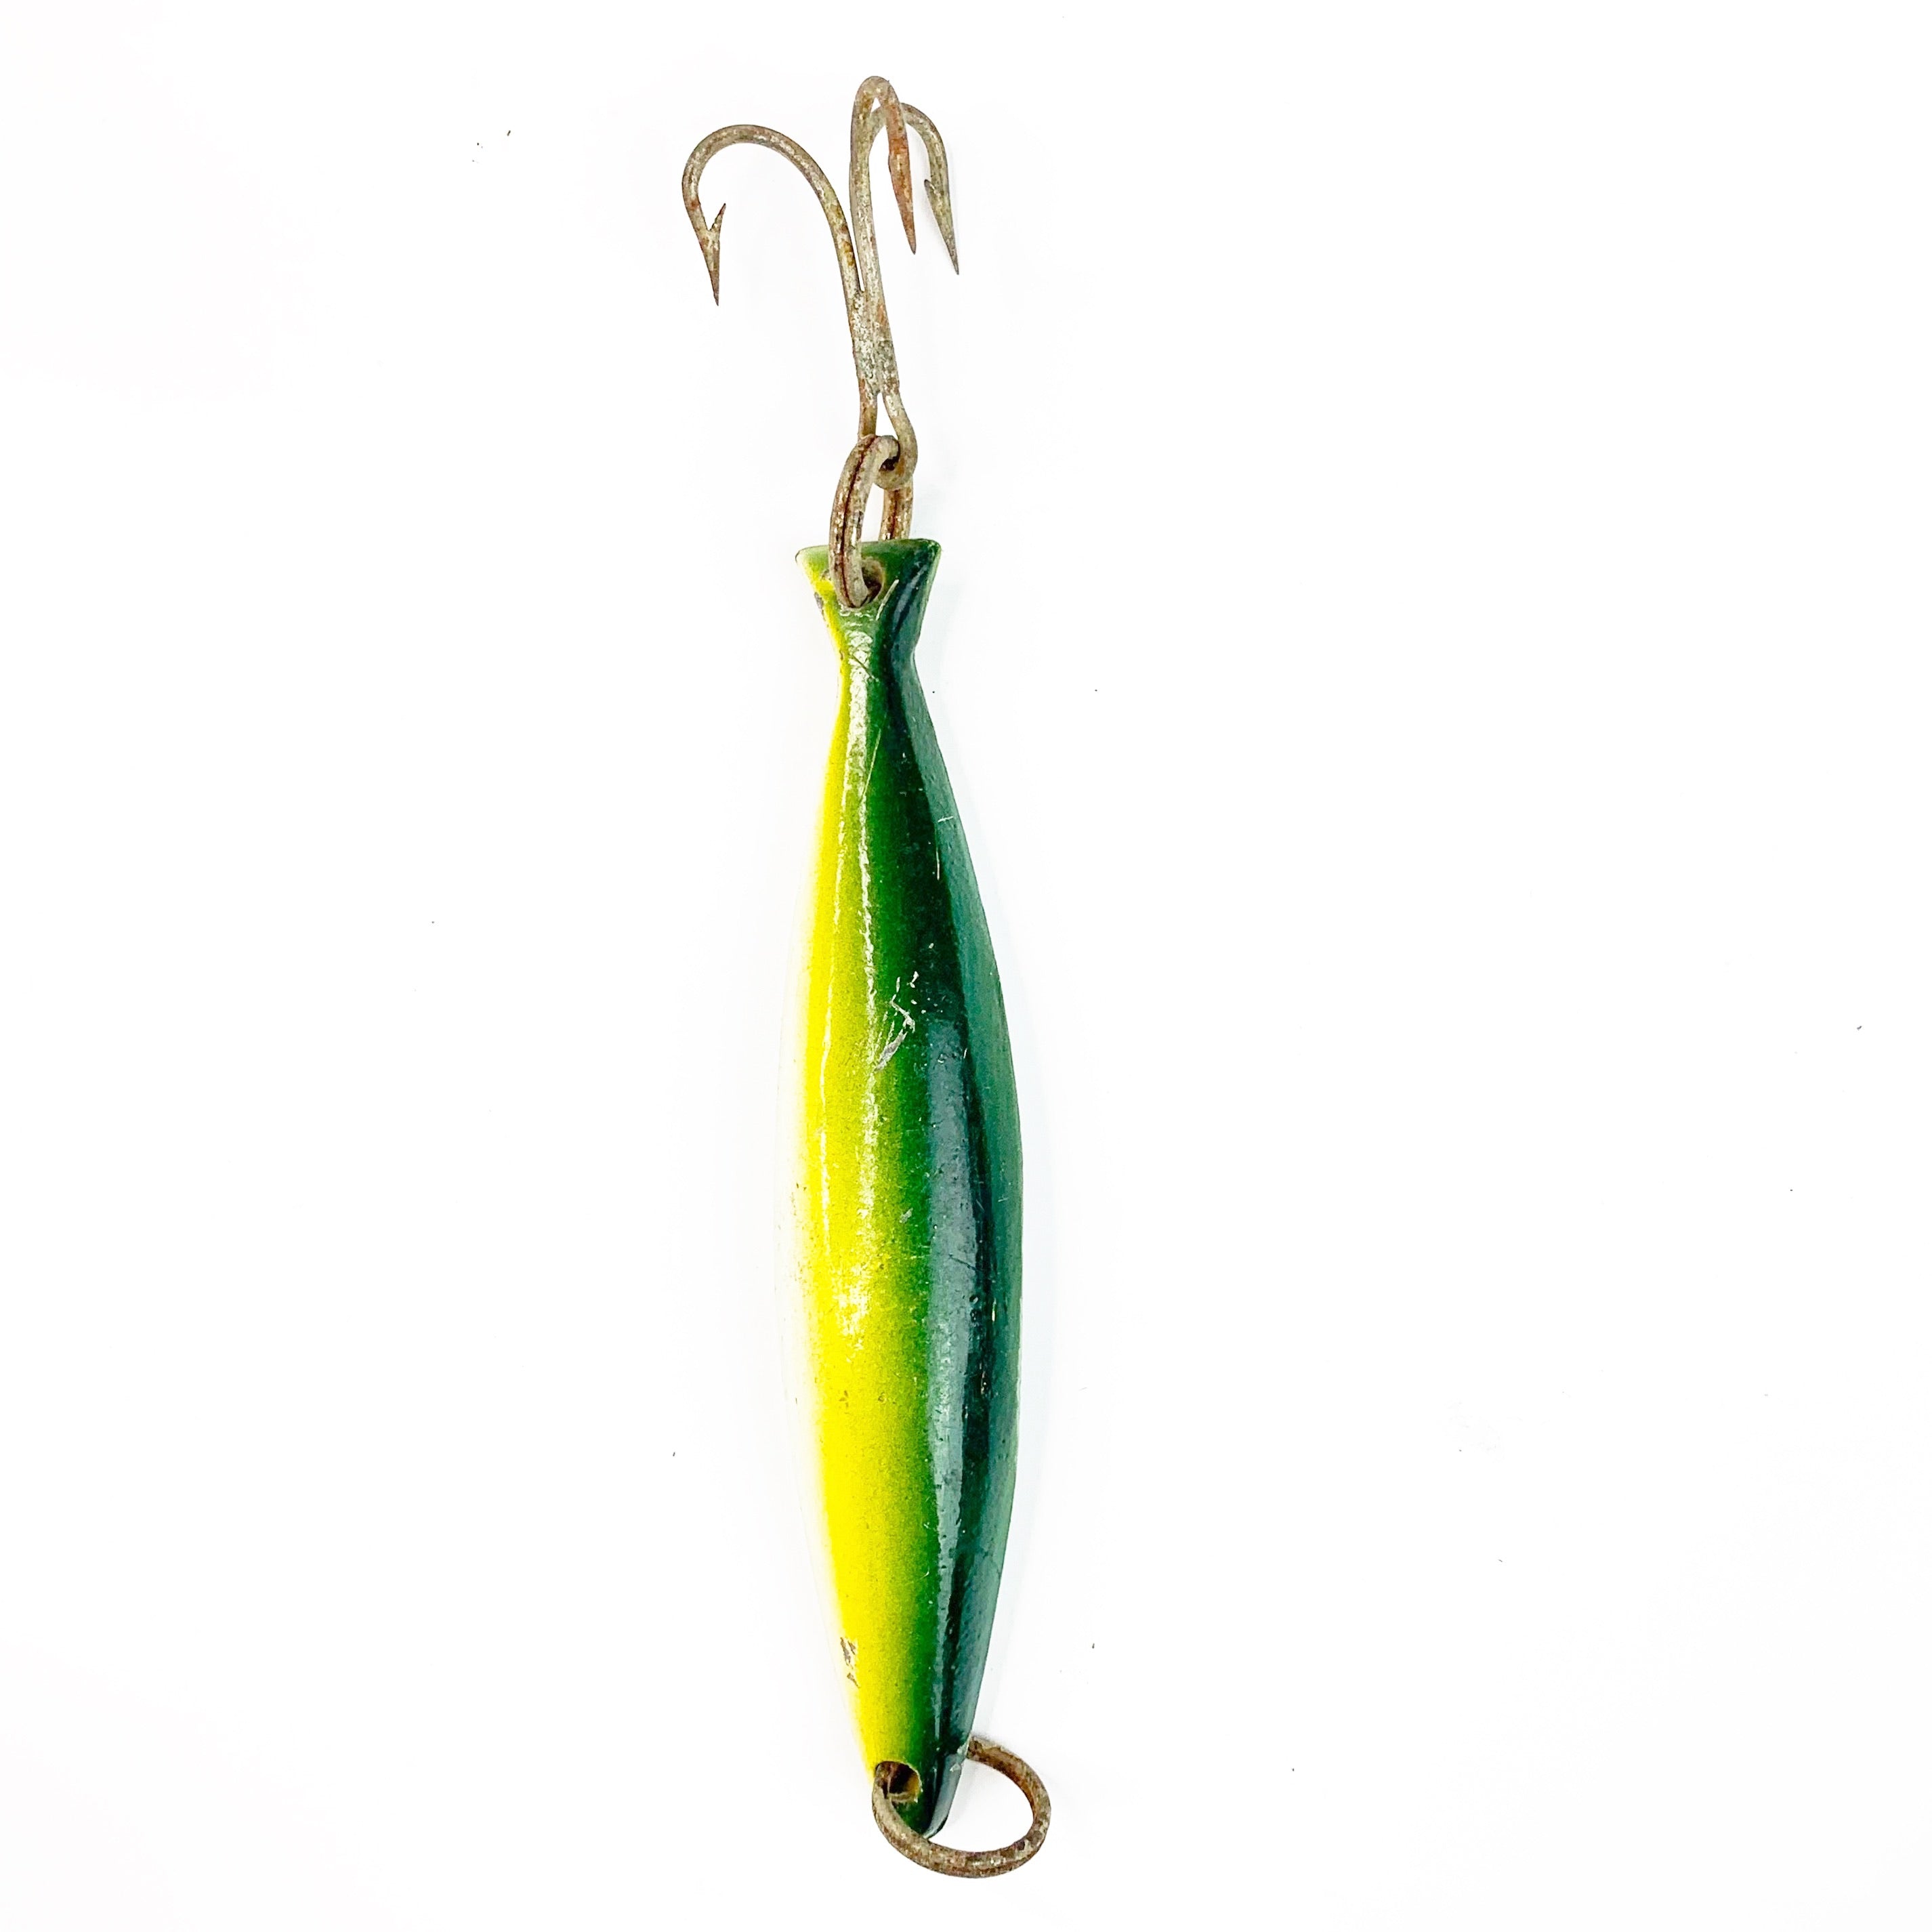 Vintage Metal Saltwater Fishing Straggler Yellow / Green Lure – The Stand  Alone